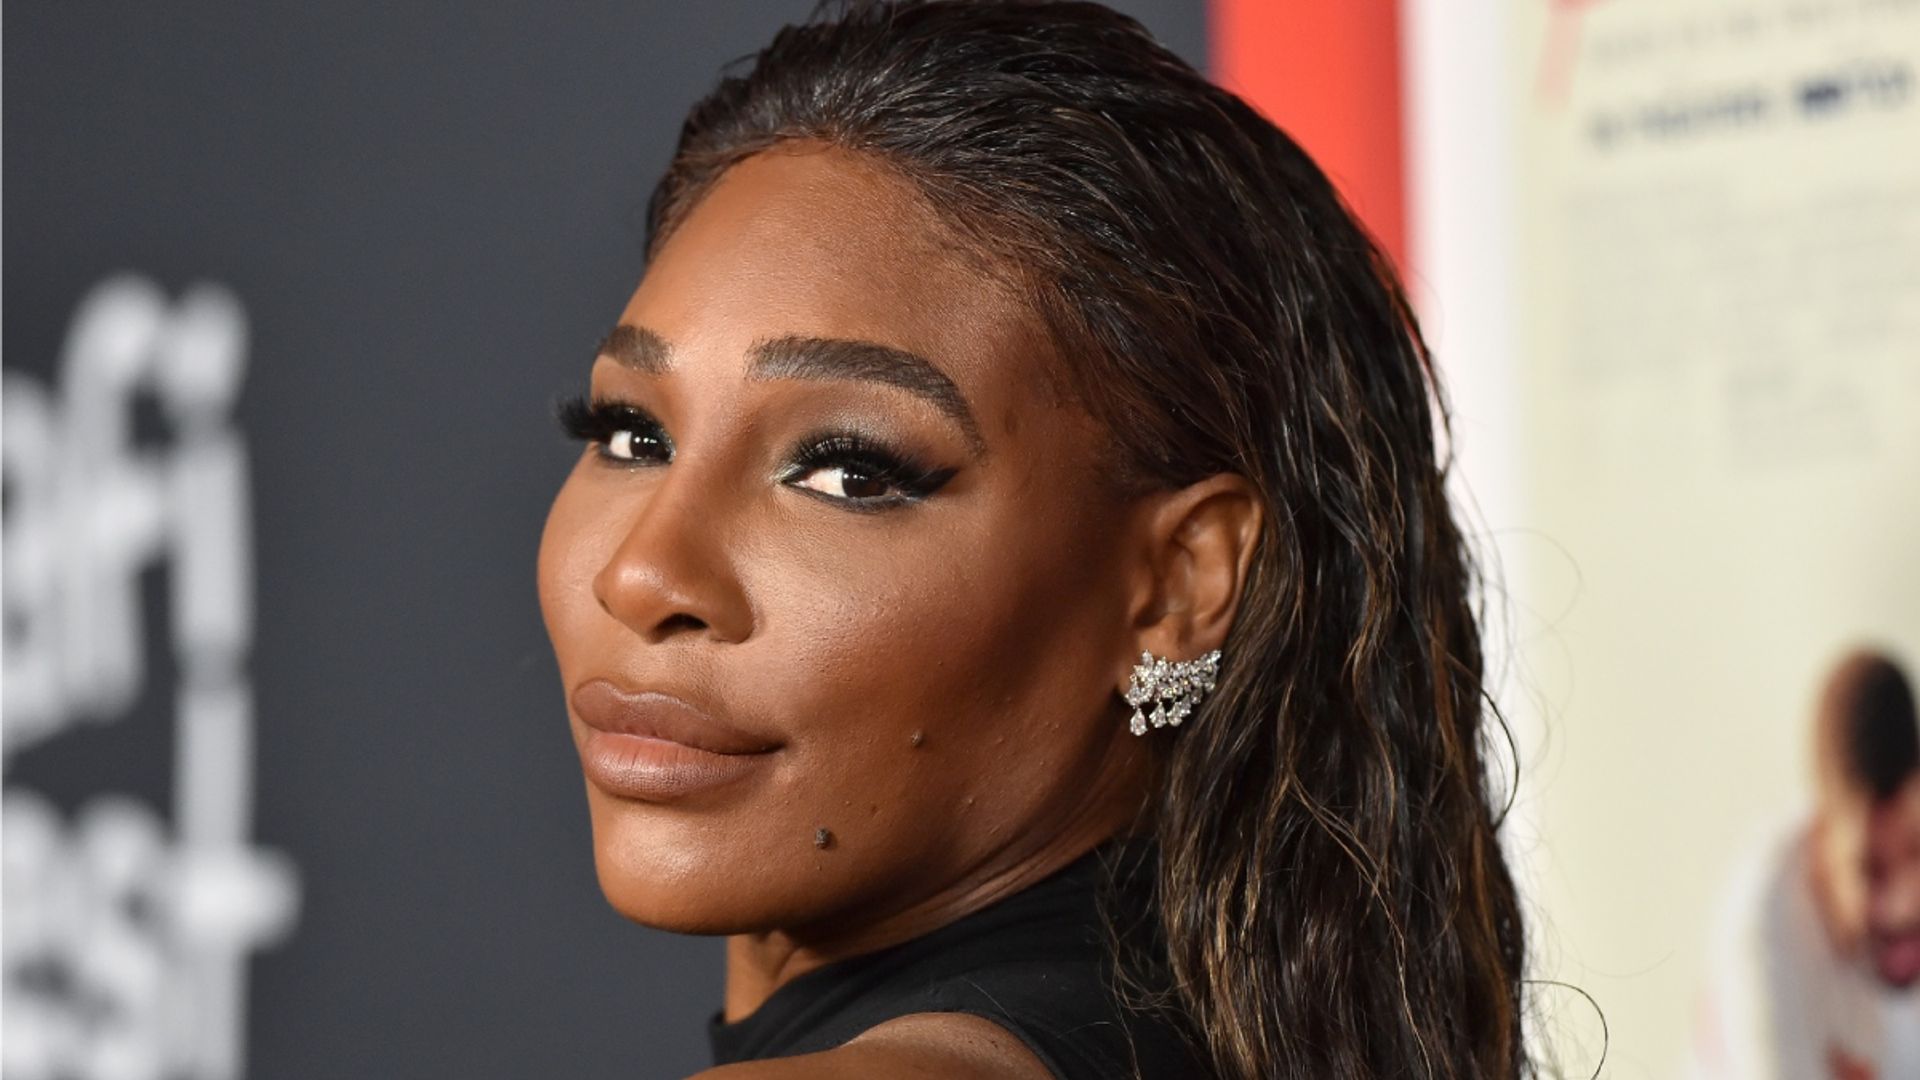 Serena Williams makes sensational red carpet appearance in studded black catsuit